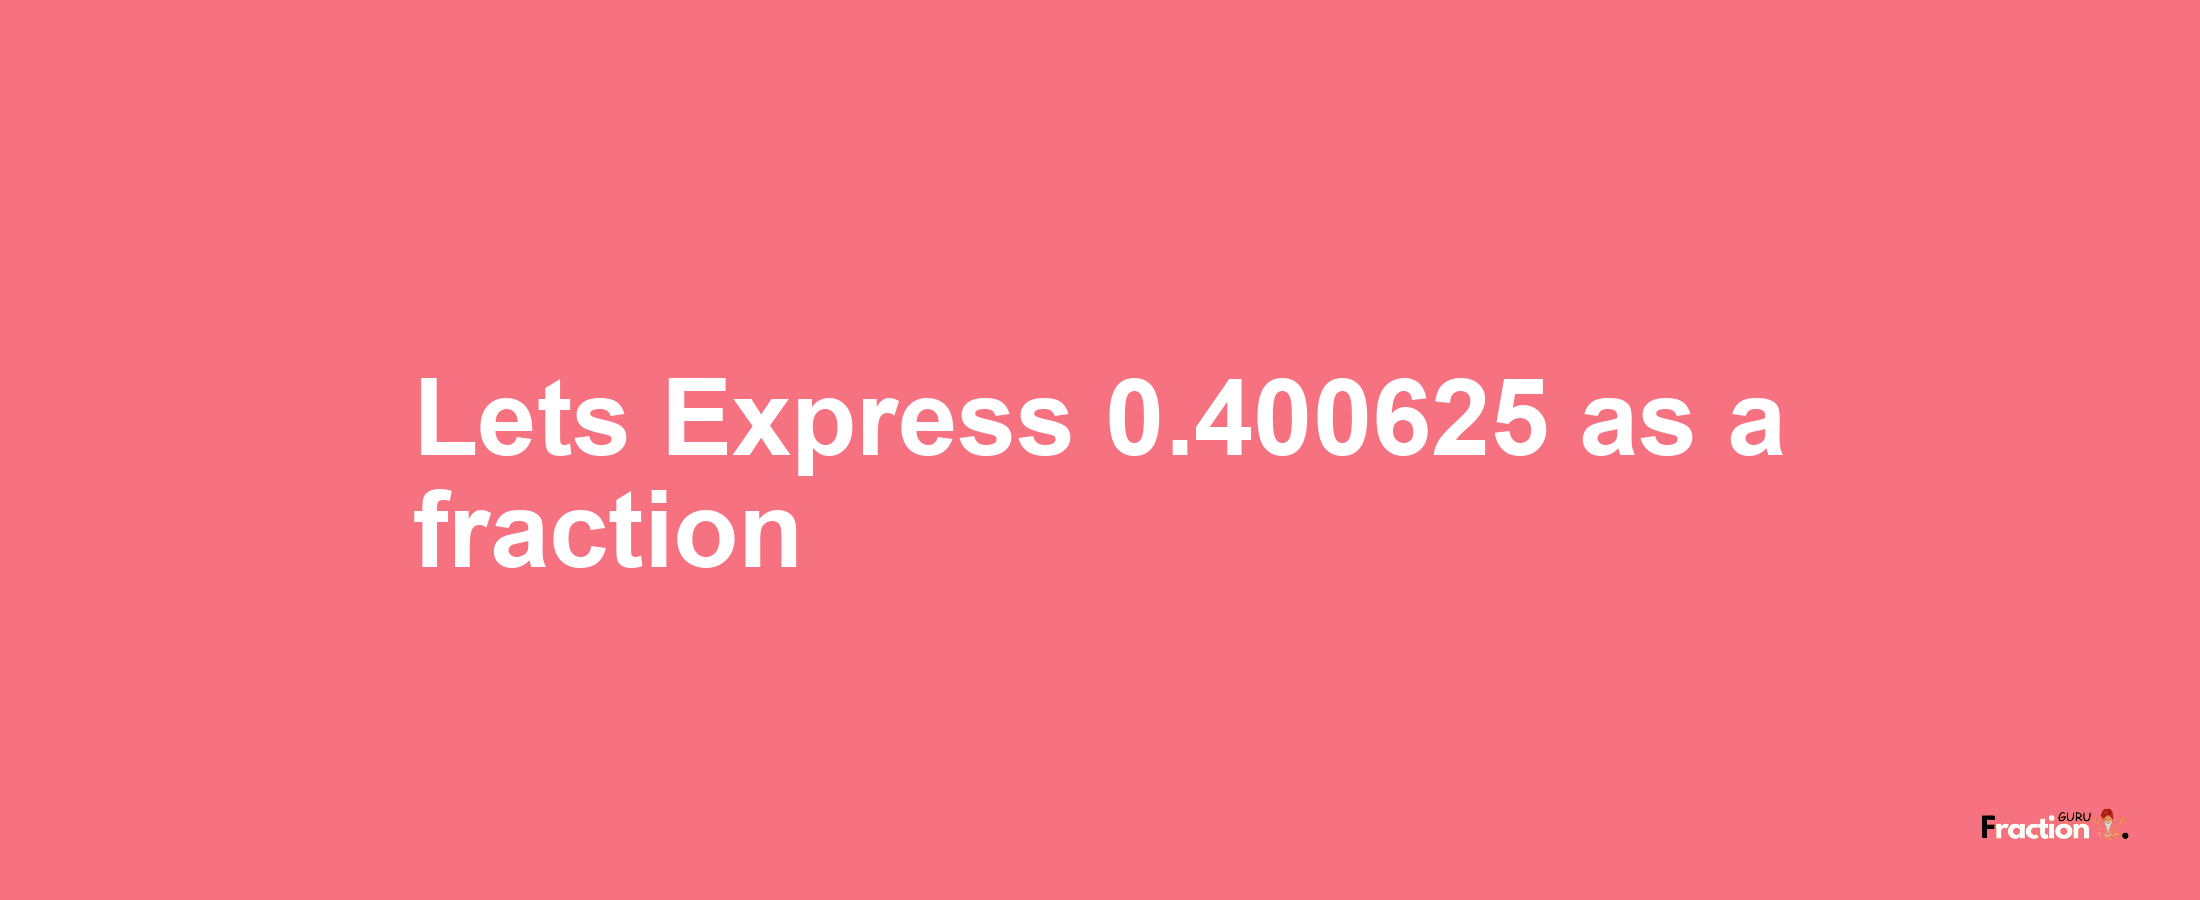 Lets Express 0.400625 as afraction